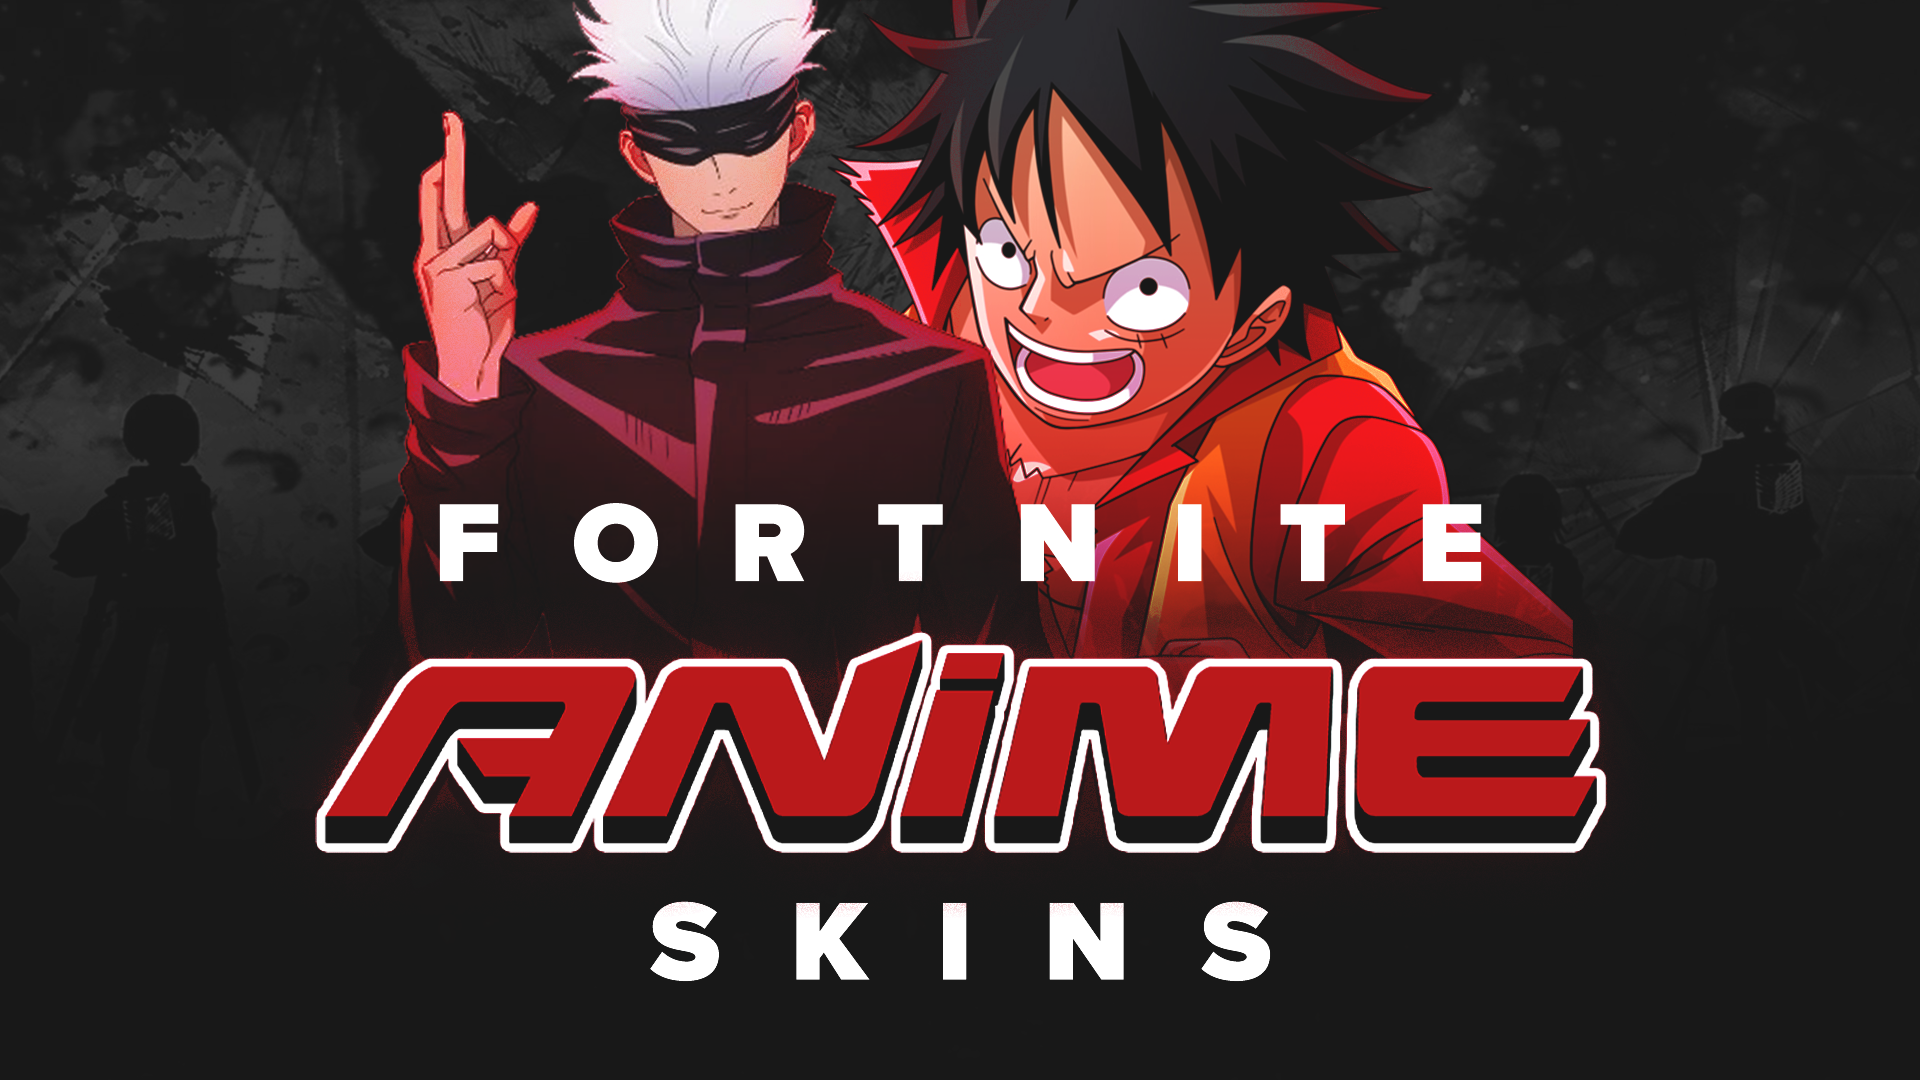 I hope we get more anime collabs in the future : r/FortNiteBR